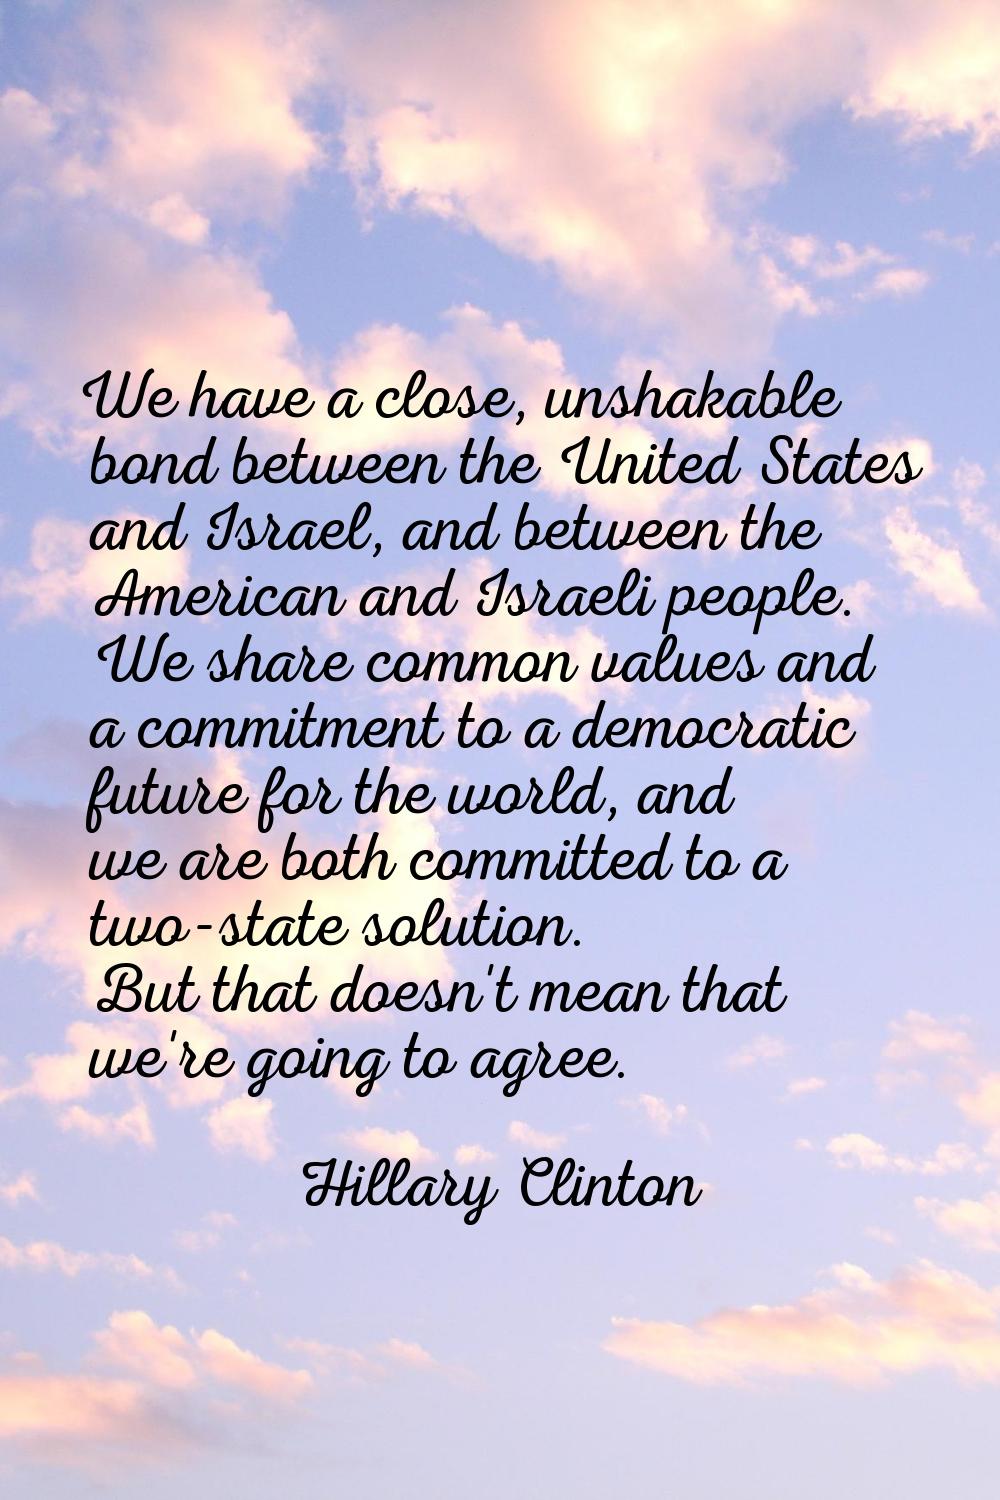 We have a close, unshakable bond between the United States and Israel, and between the American and